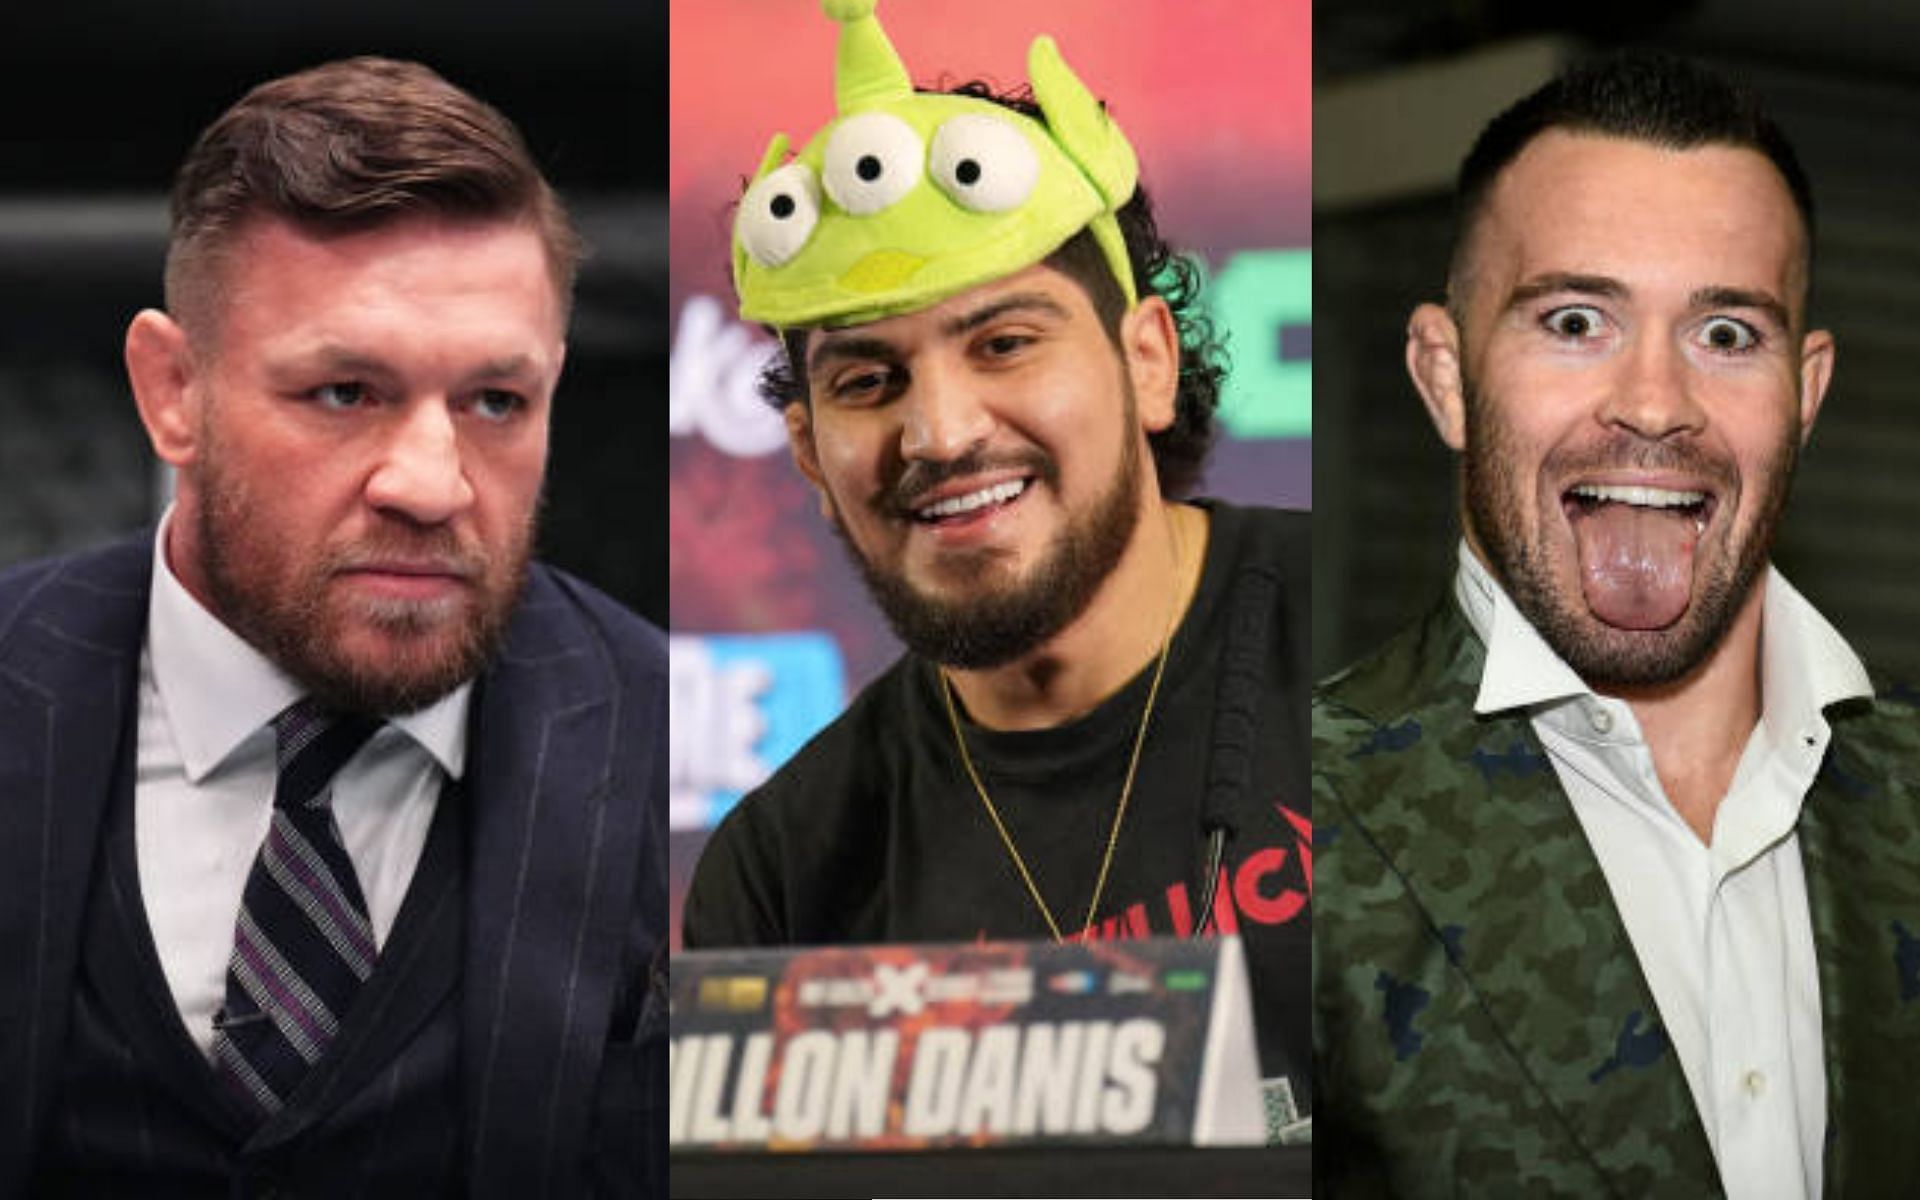 Conor McGregor (left), Dillon Danis (middle) and Colby Covington (right) [Images Courtesy: @GettyImages]